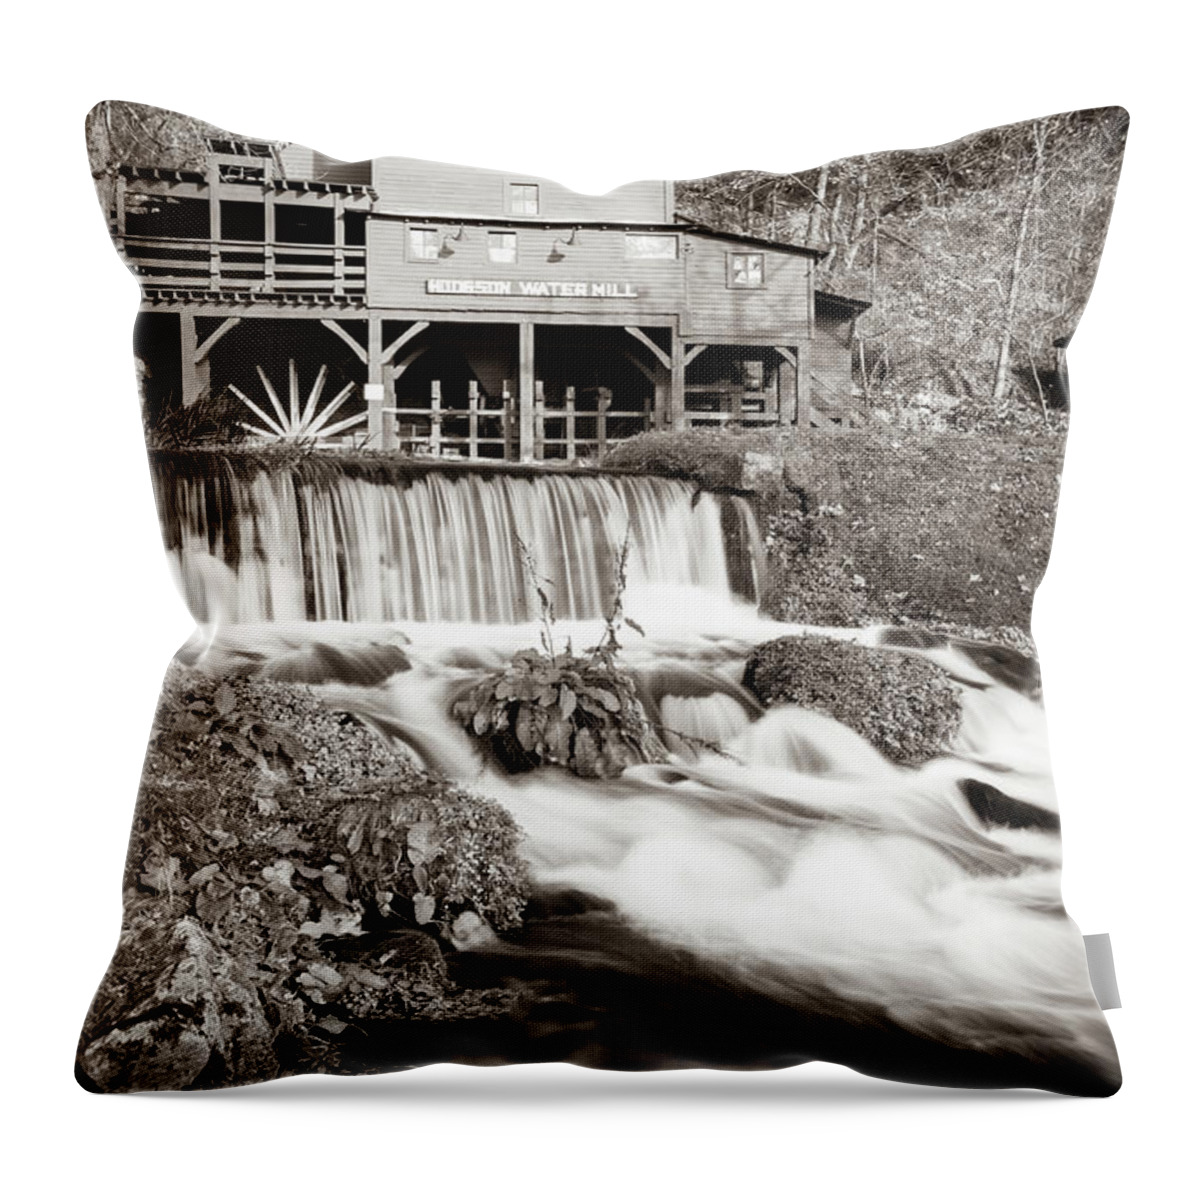 Sepia Throw Pillow featuring the photograph Timeless Charm Of Old Hodgson Mill - Sepia Edition by Gregory Ballos